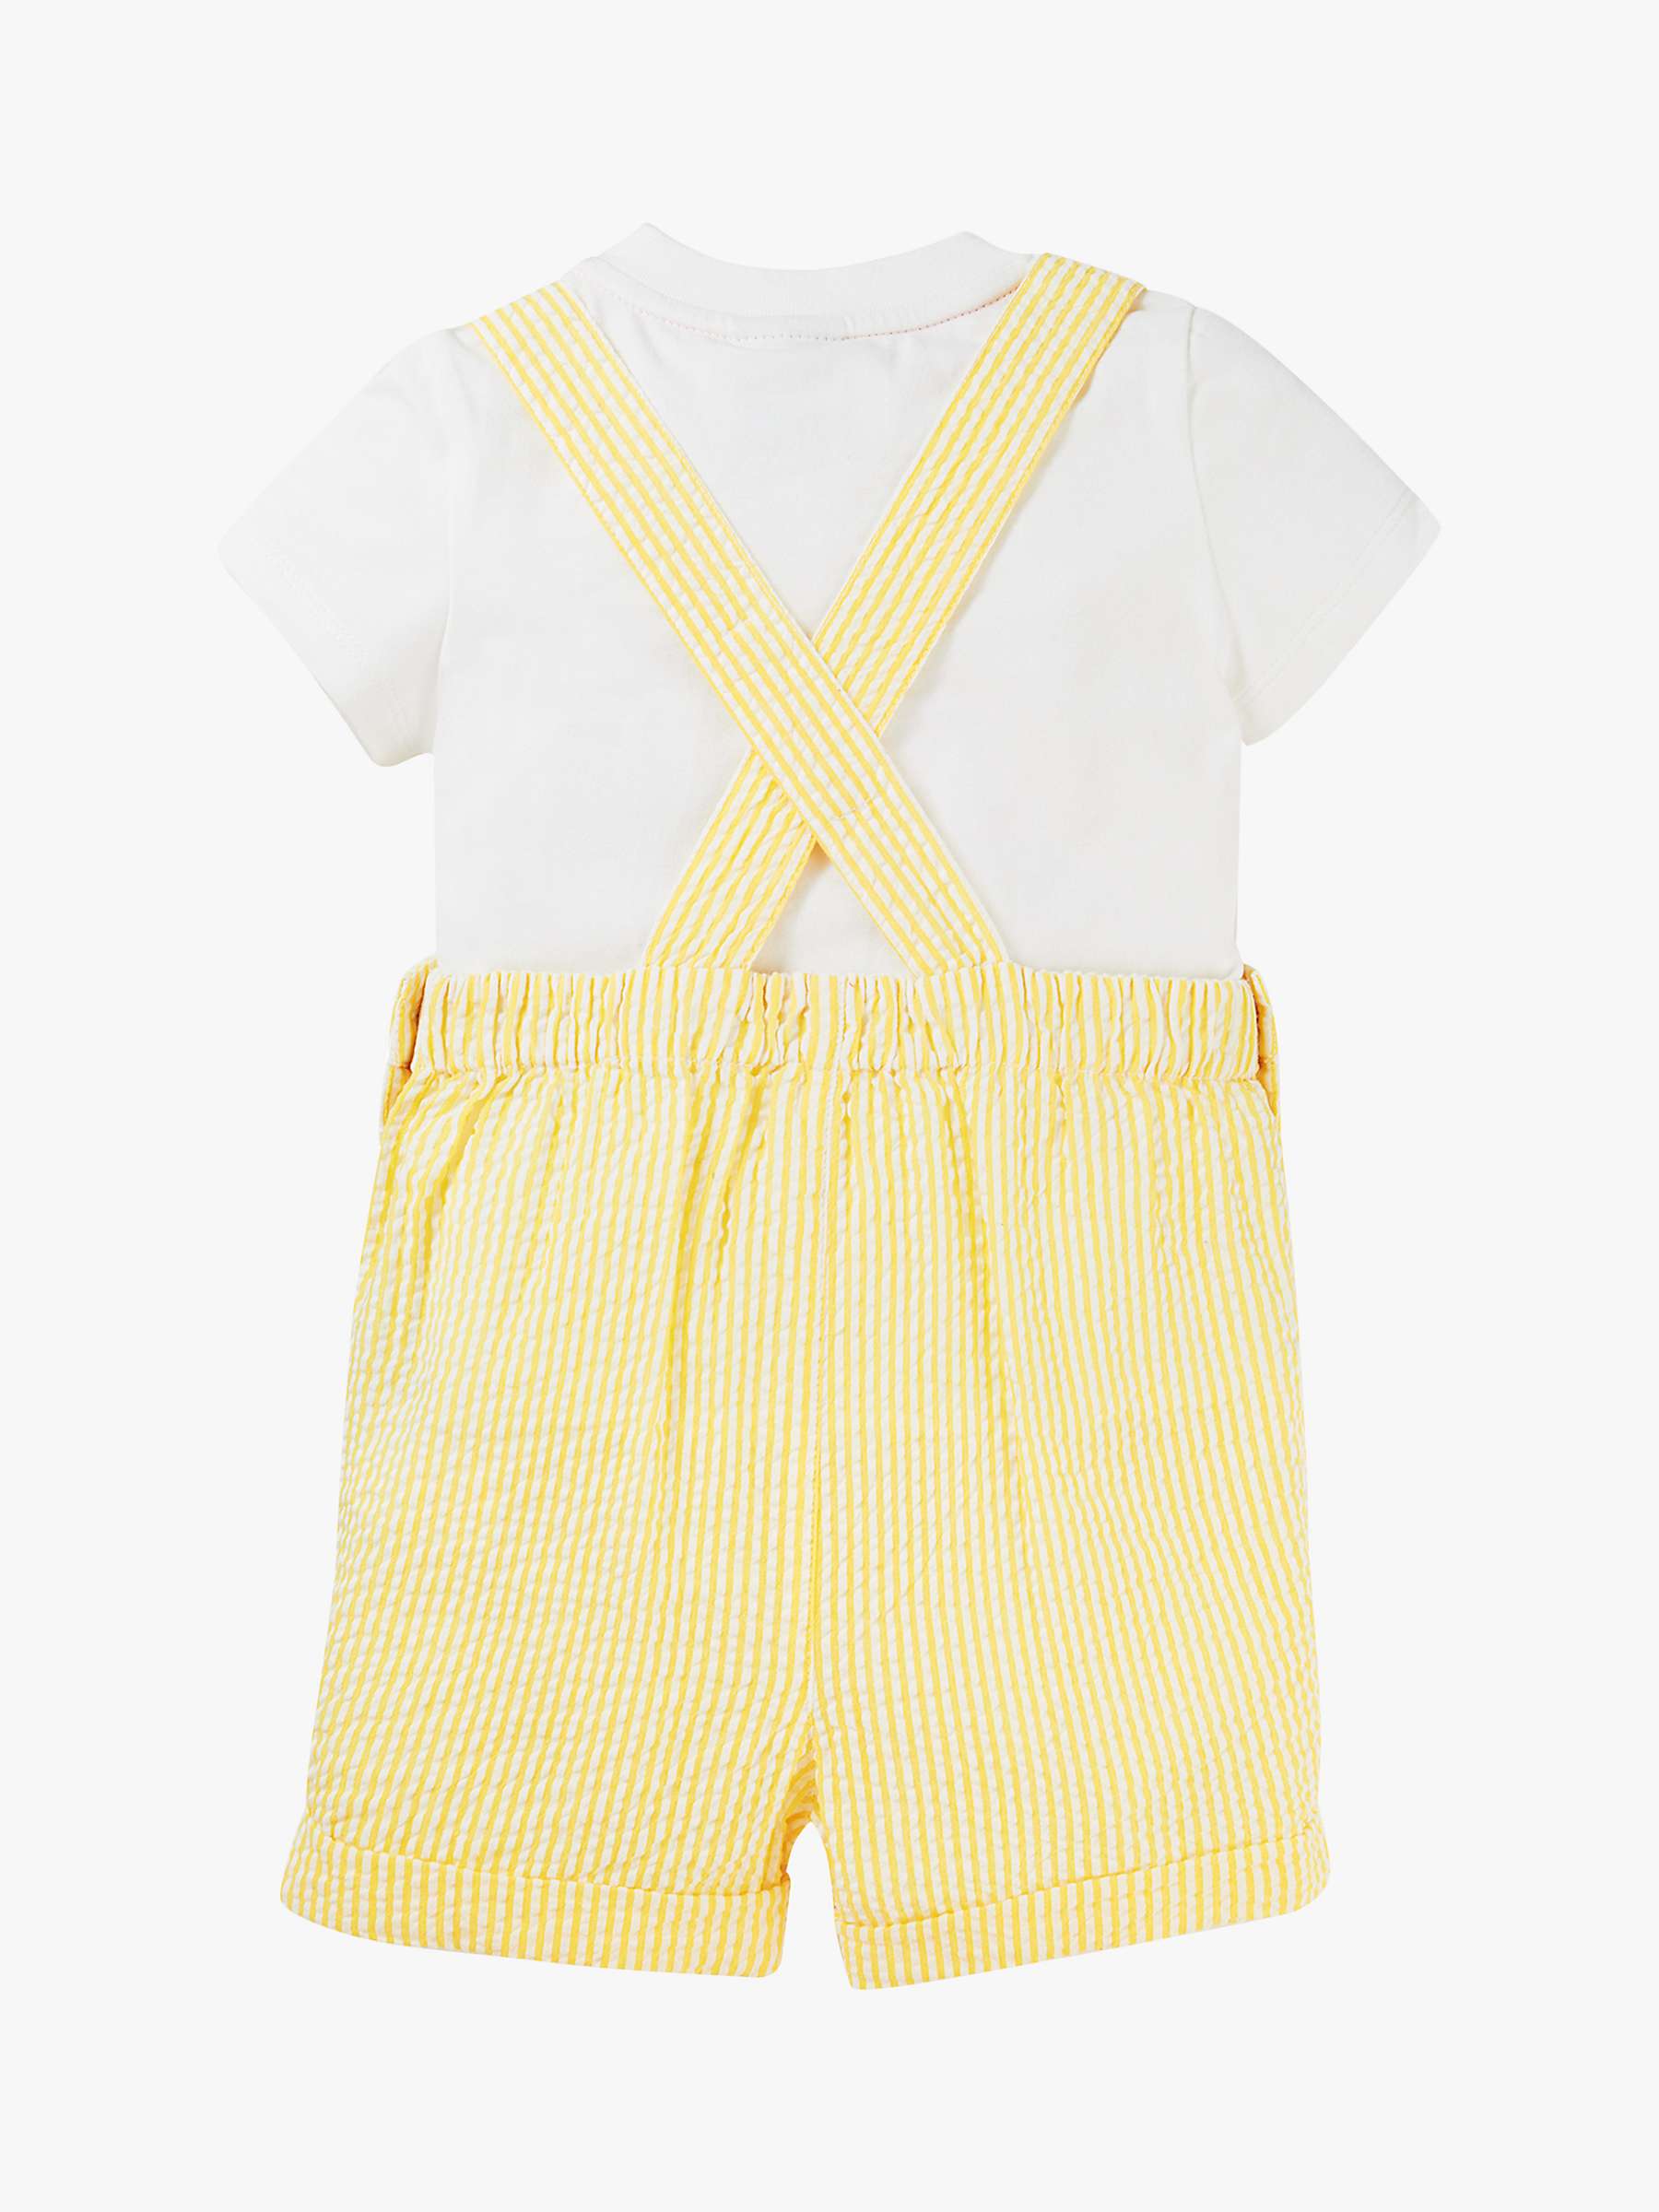 Buy Frugi Baby Godrevy Organic Cotton Duck Applique Dungaree Outfit, Dandelion/White Online at johnlewis.com